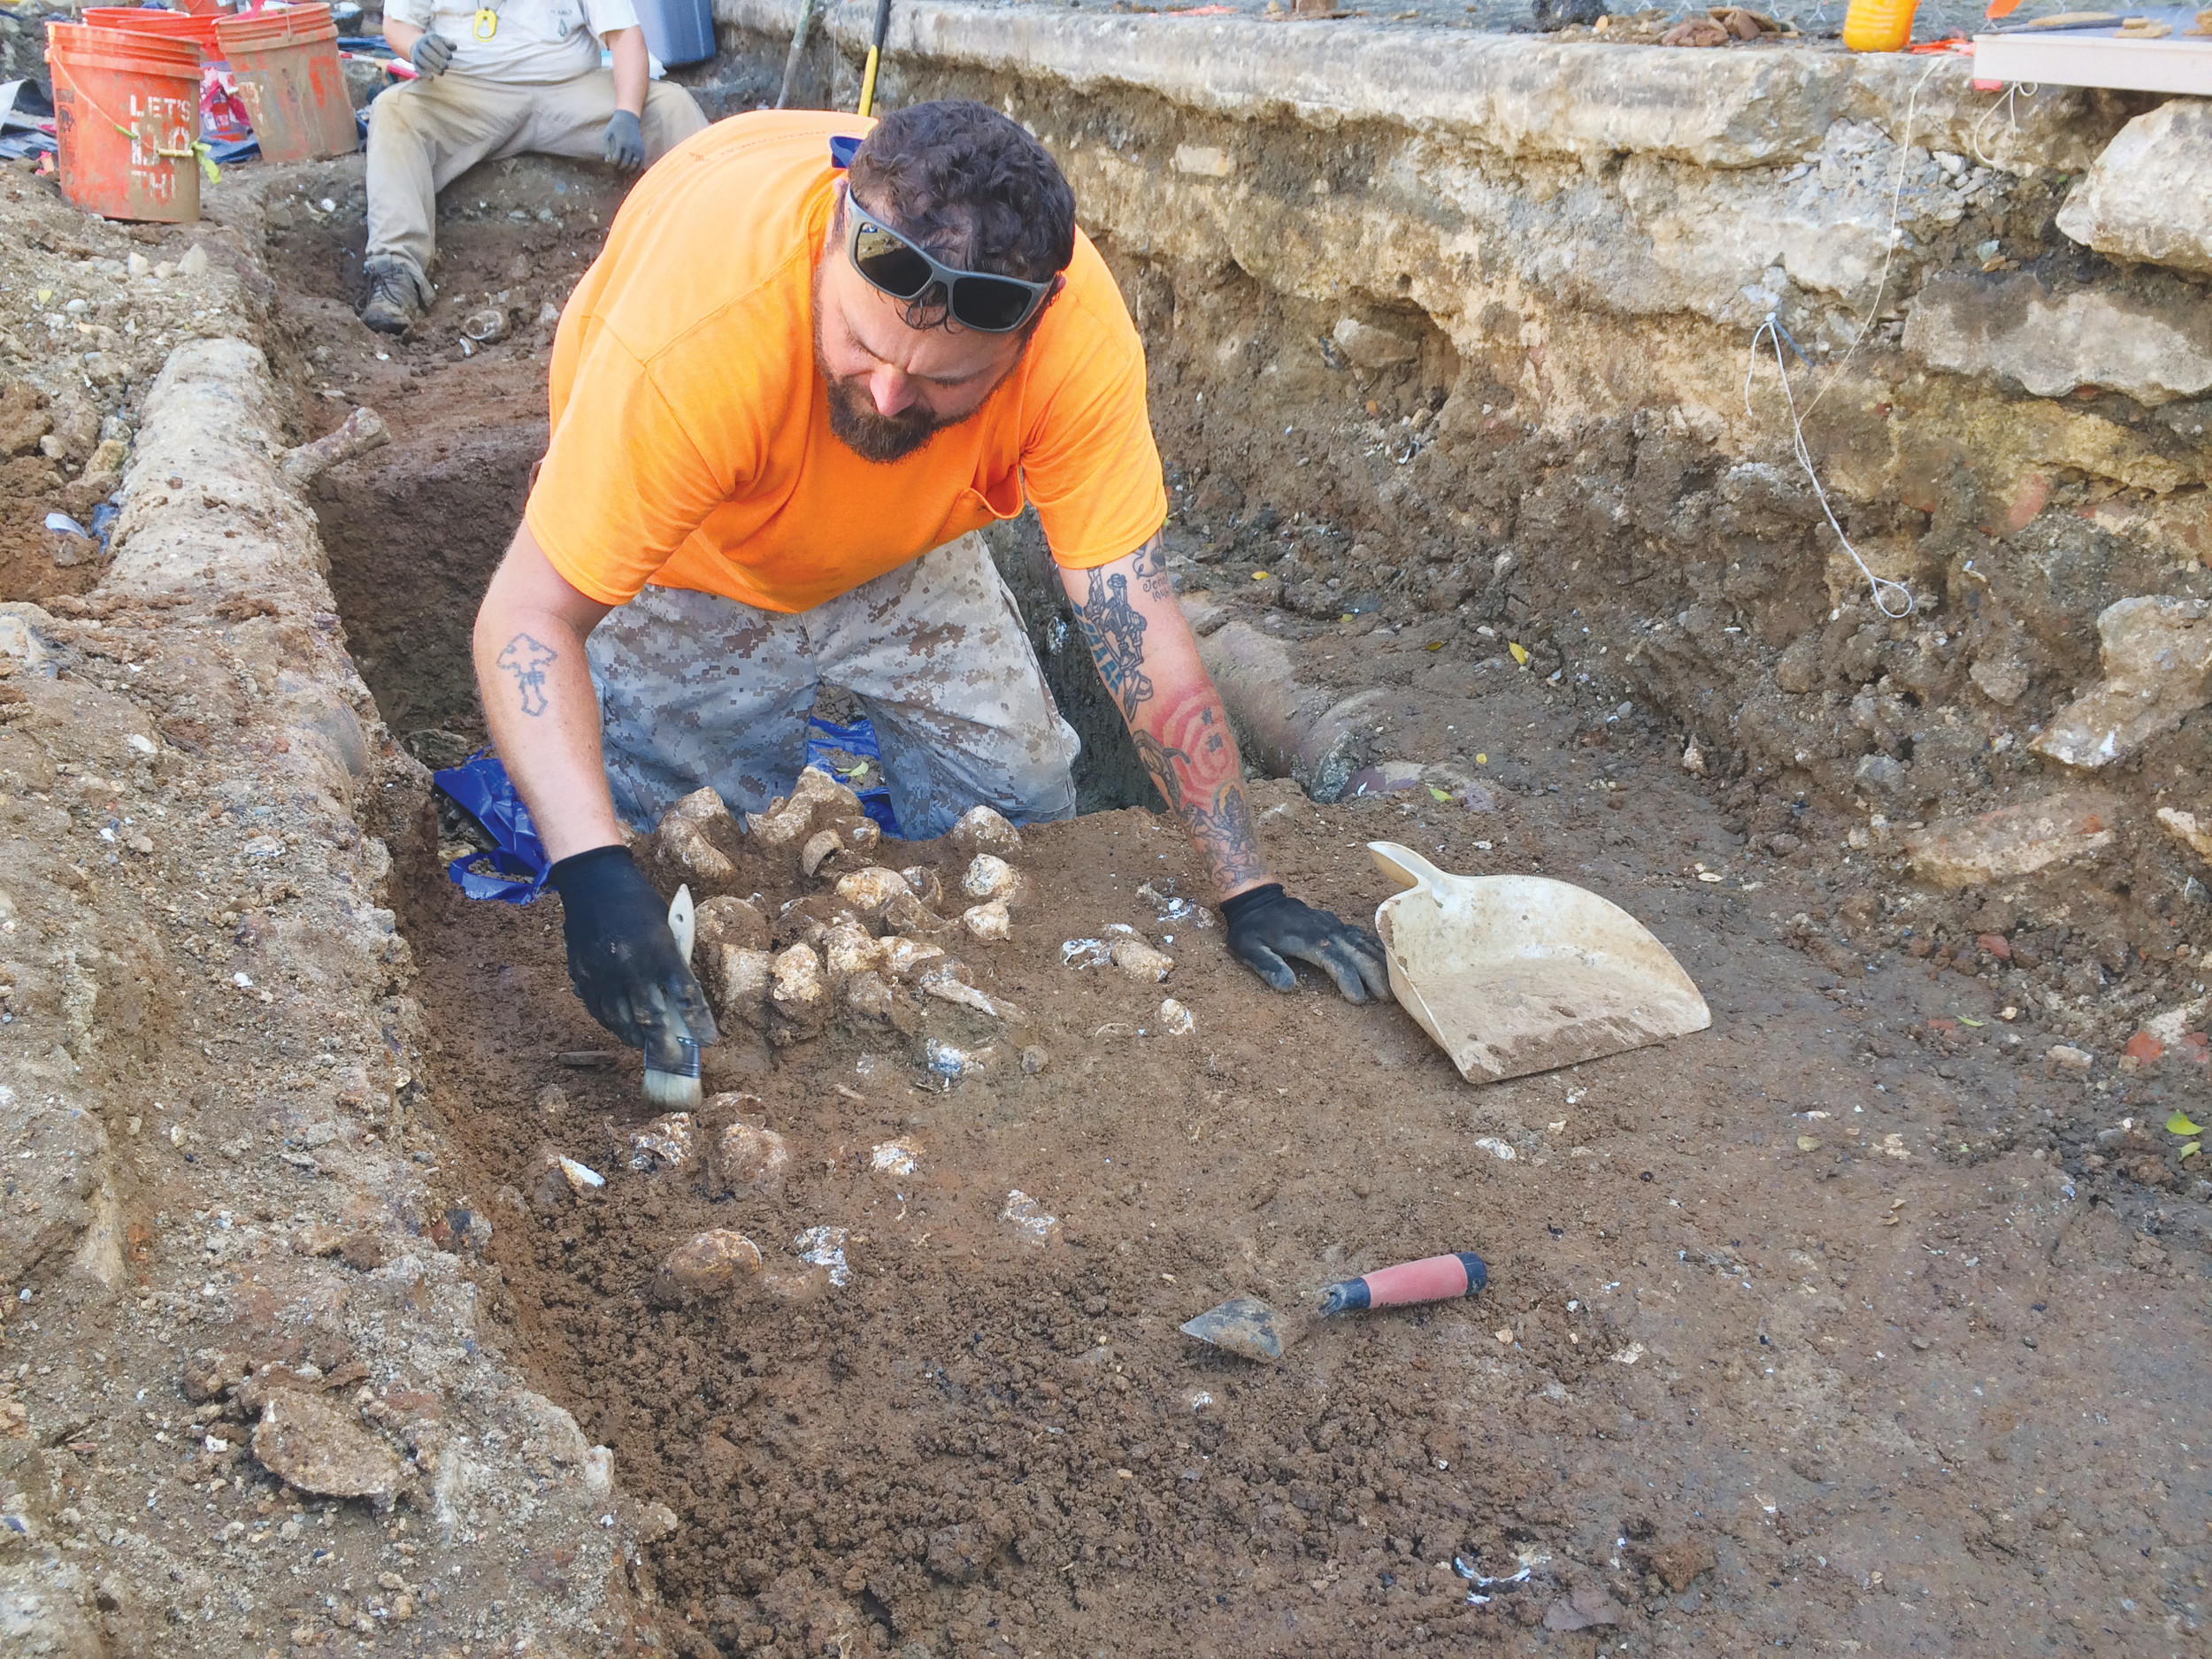 Blue Nelson, a Middleburg High graduate and co-host of The History Channel show “Found,” is shown here excavating a midden in downtown Charlotte Amelie in St. Thomas, Virgin Islands.